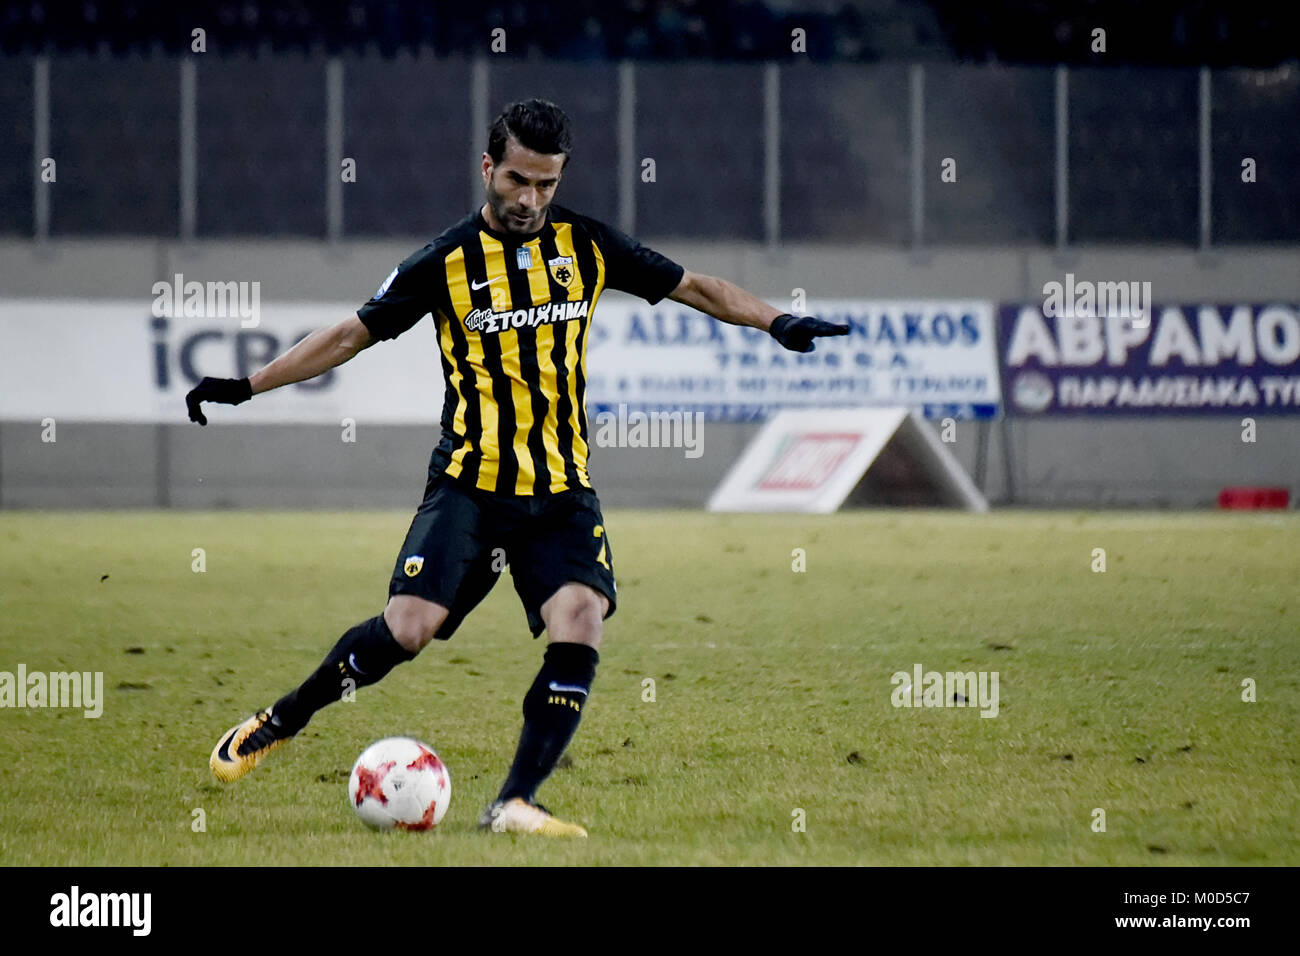 Larissa, Greece. 20th Jan, 2018. AEK FC midfielder Masoud Shojaei in  action, during a Greek Superleague soccer match at the Greek city of Larissa  between AEL FC and AEK FC. The result